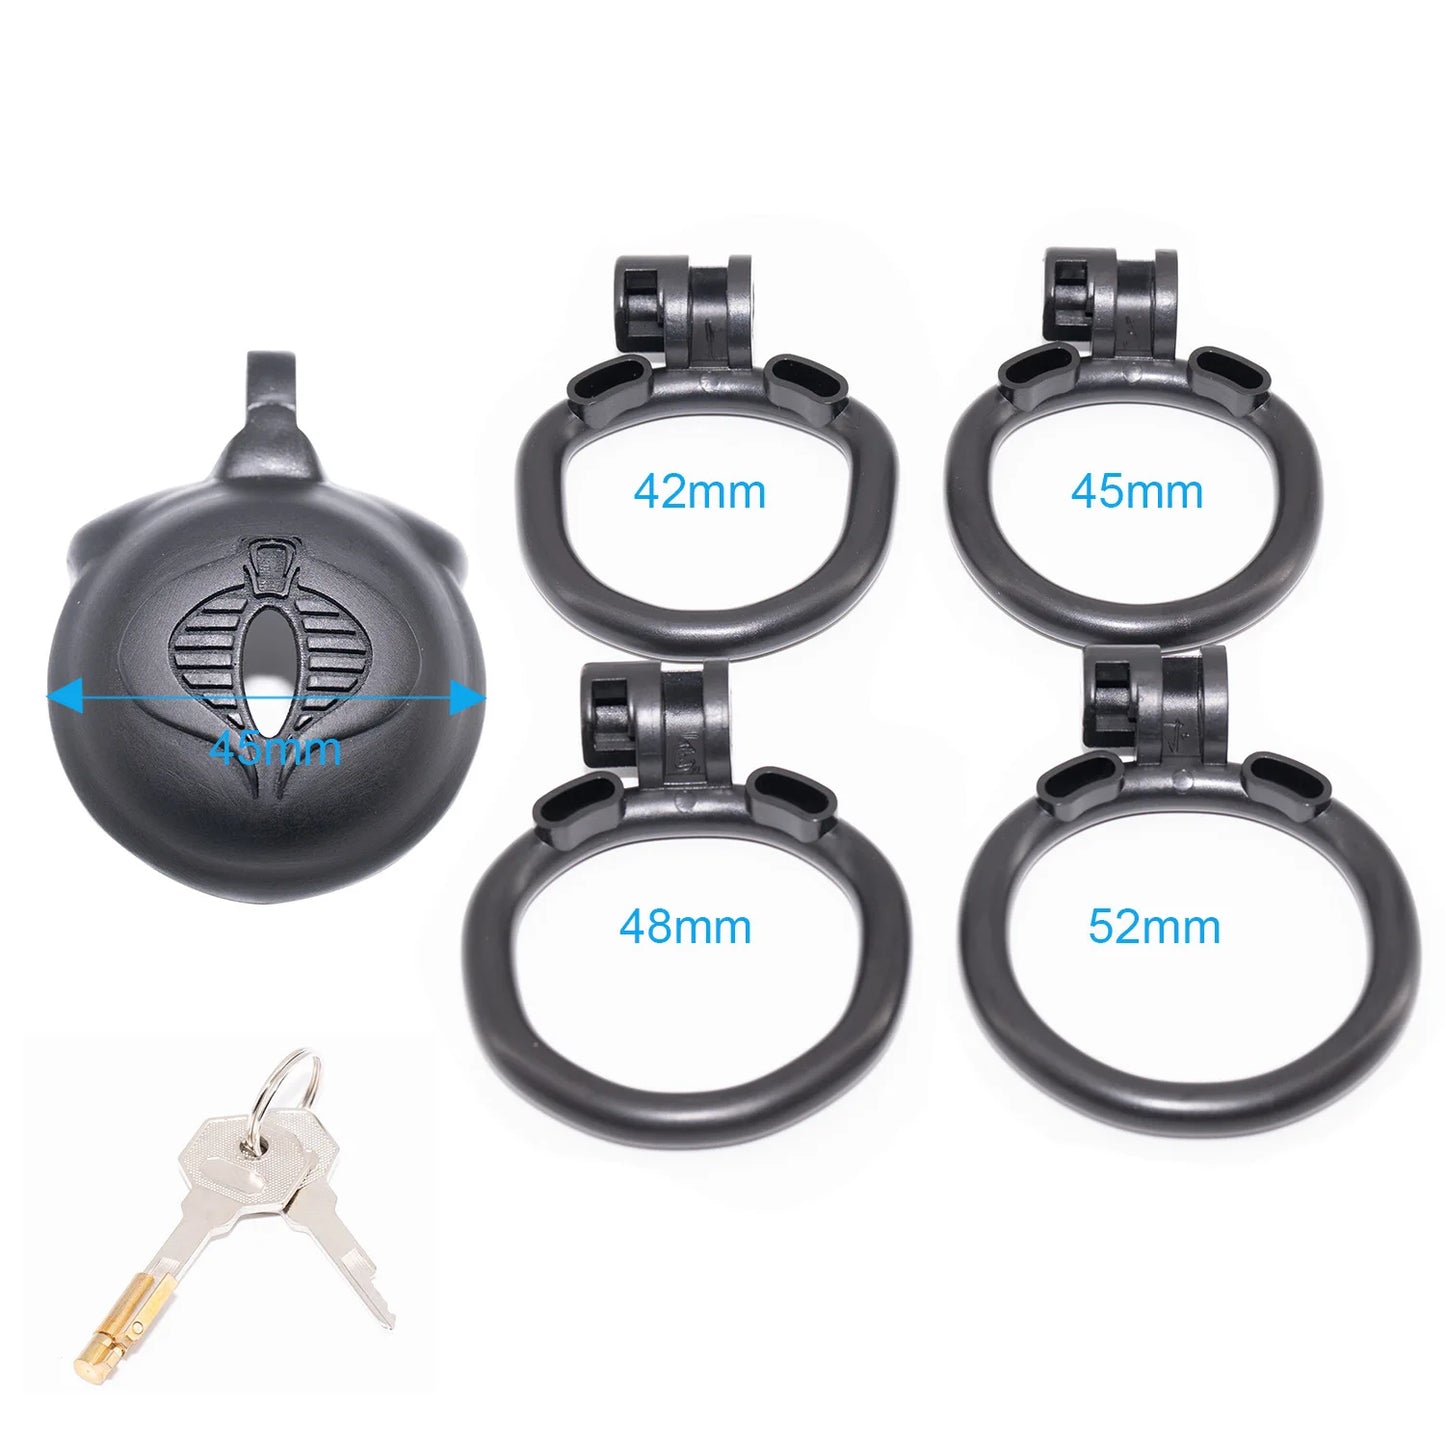 Micro Cobra Chastity Cage Set with 4 Penis Rings - KeepMeLocked